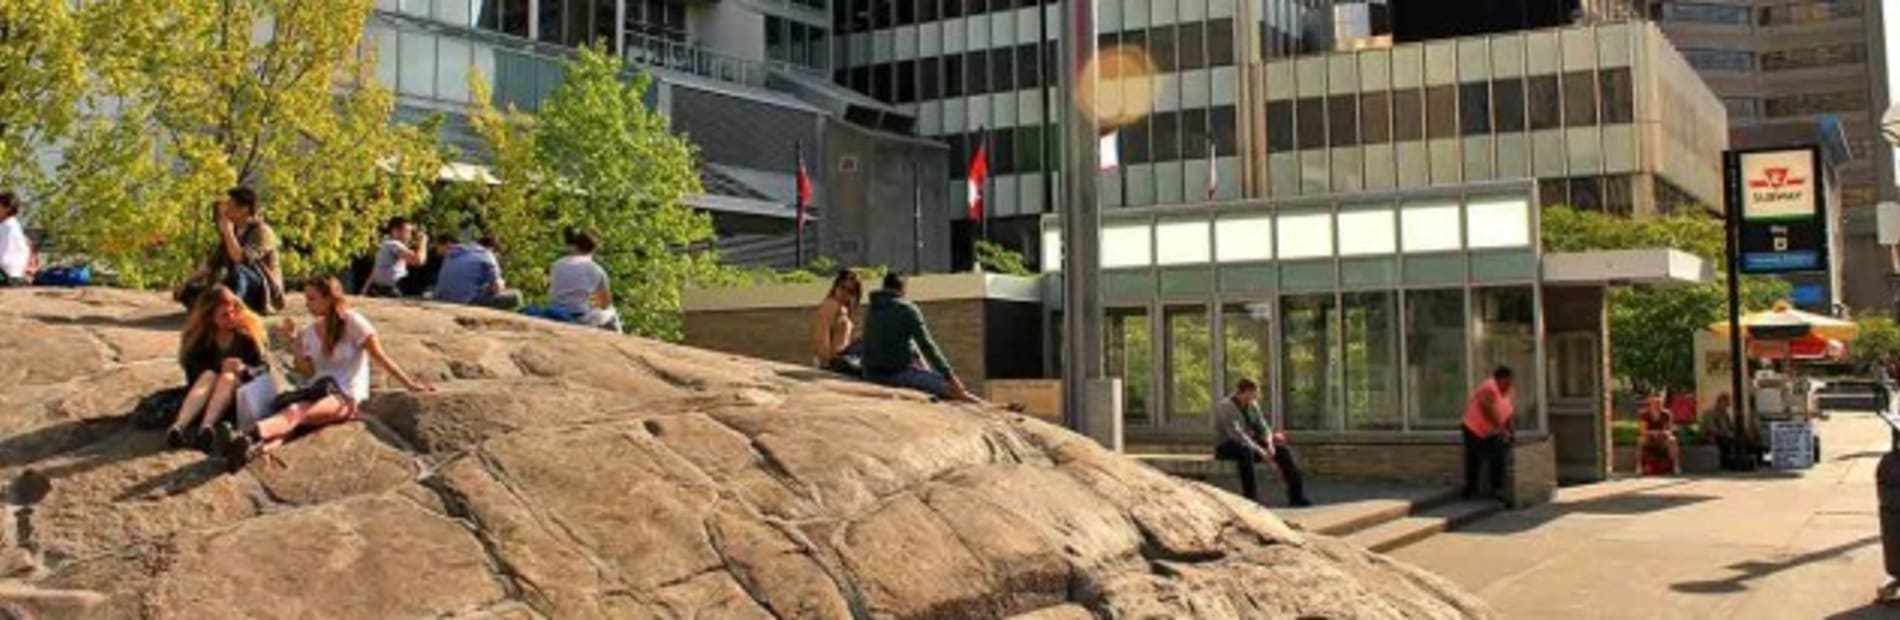 People socialising a top a large rock infront of a modern urban landscape. 